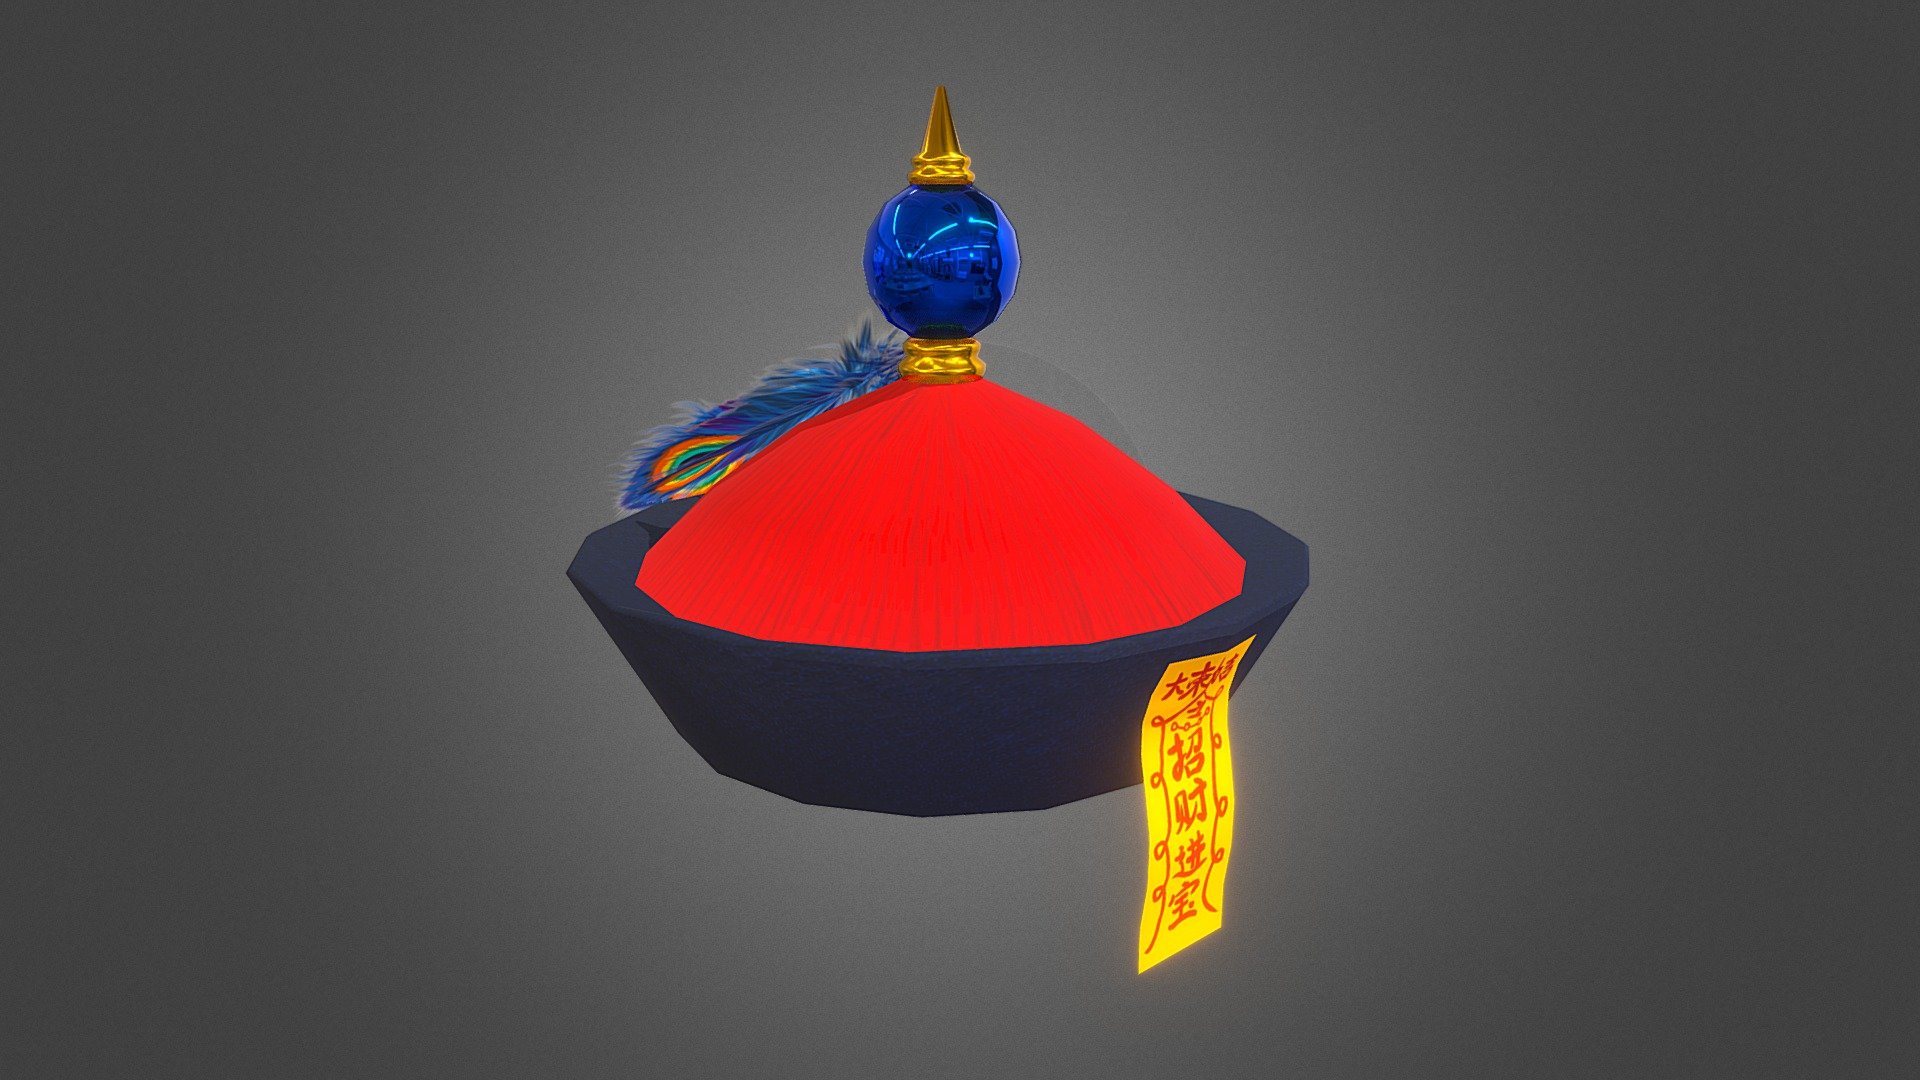 This is a Chinese-style zombie hat I made using Blender.

Its material consists of five PBR textures: BaseColor, Metalness, Roughness, Normal, and Opacity.

It can be directly imported into a game engine and render excellent resultsa immediately 3d model